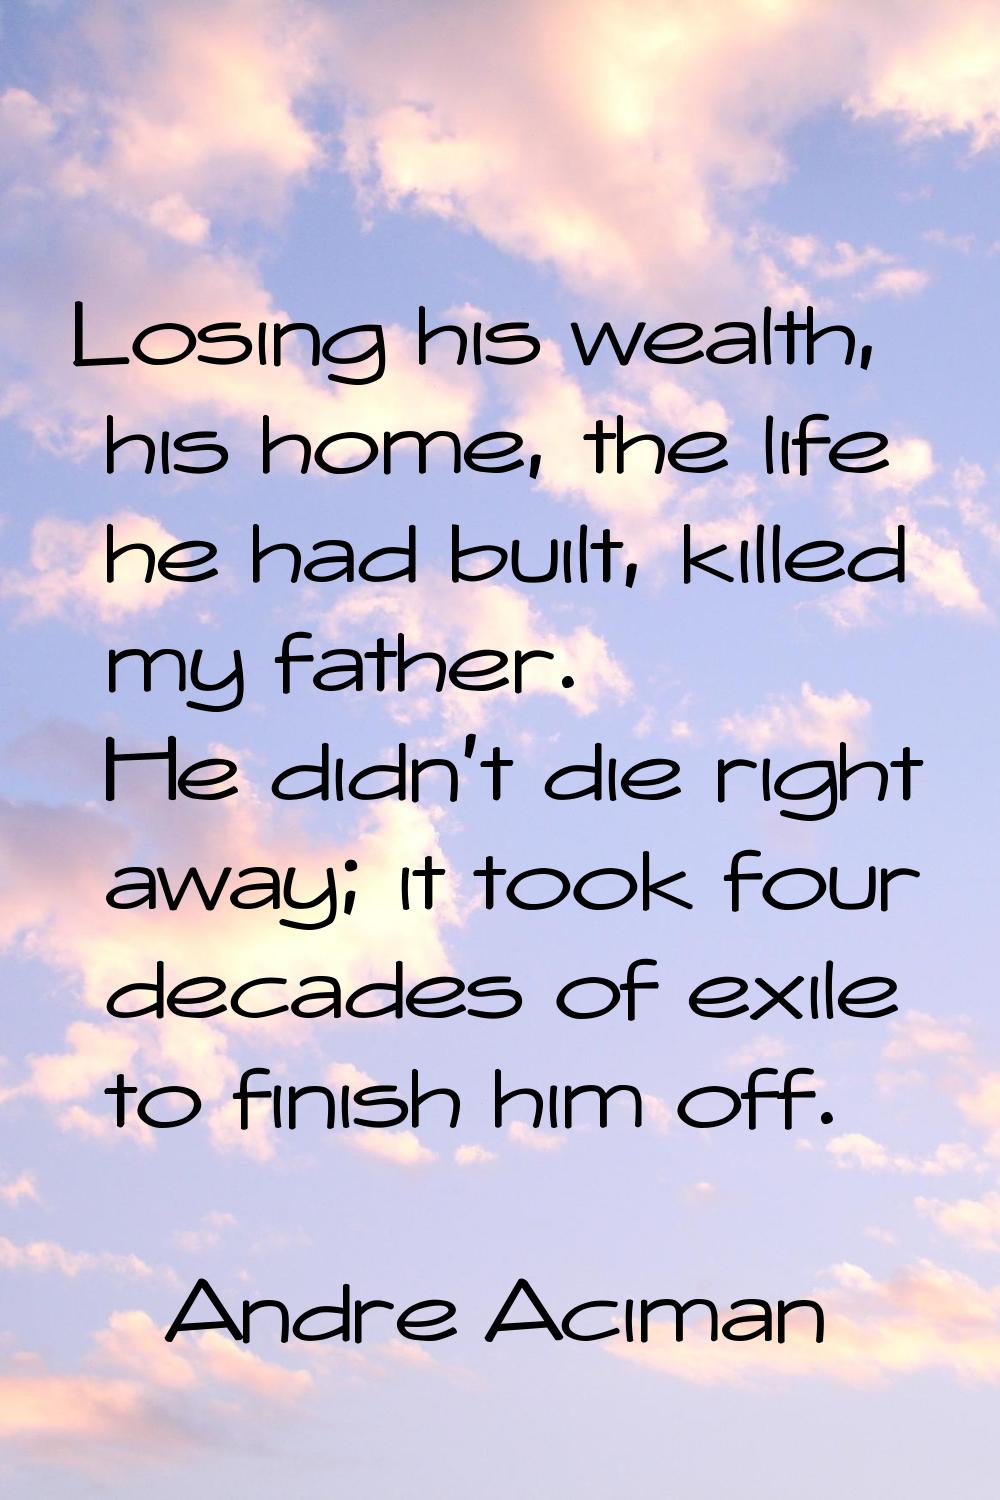 Losing his wealth, his home, the life he had built, killed my father. He didn't die right away; it 